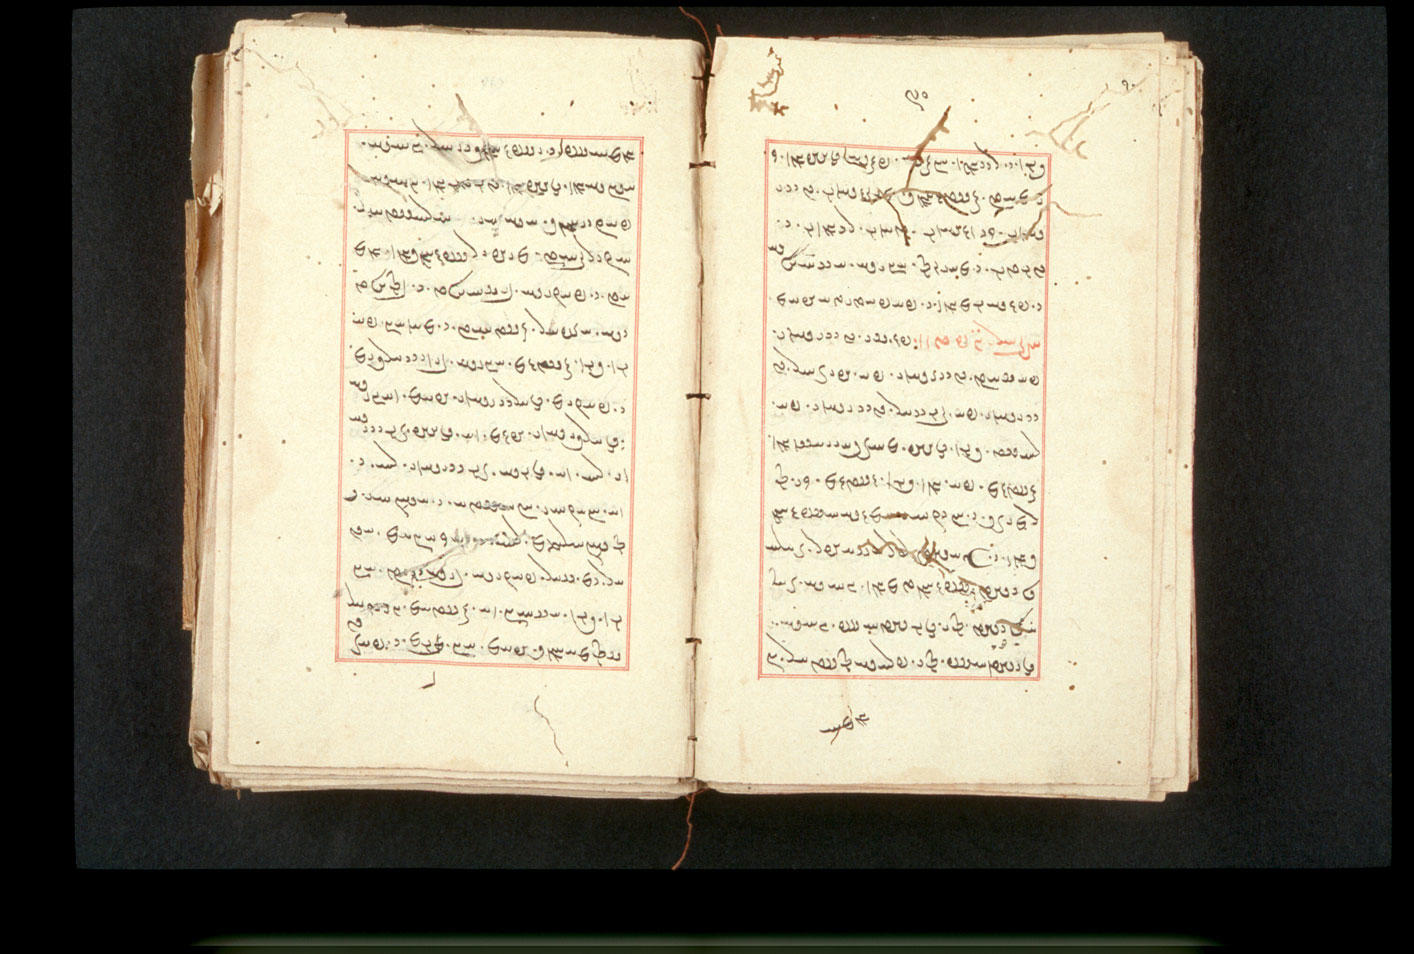 Folios 90v (right) and 91r (left)